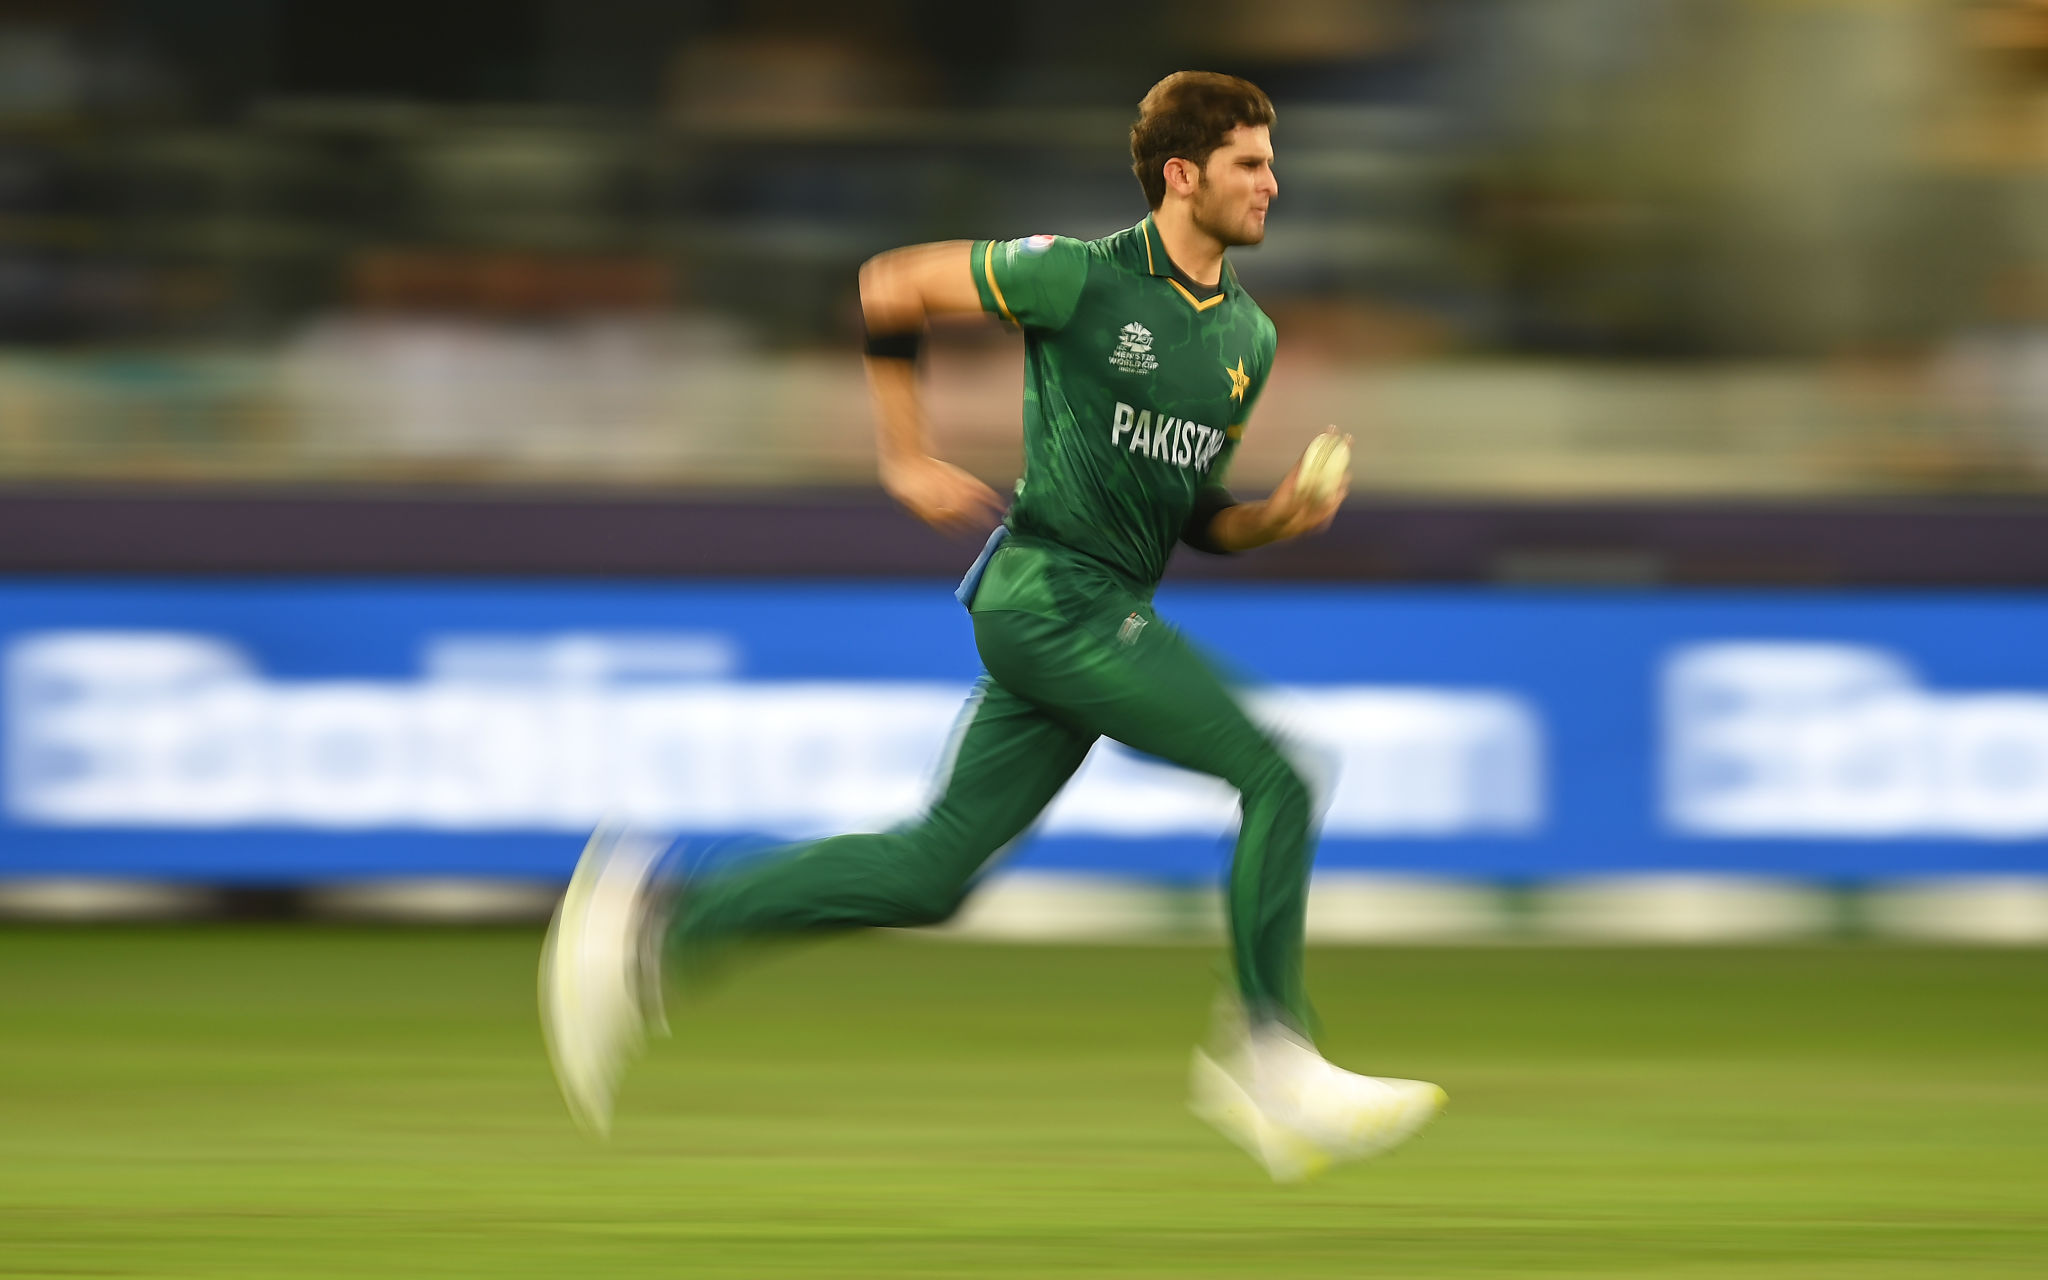 Shaheen Afridi of Pakistan in bowling action during the ICC Men's T20 World Cup semi-final match between Pakistan and Australia at Dubai 